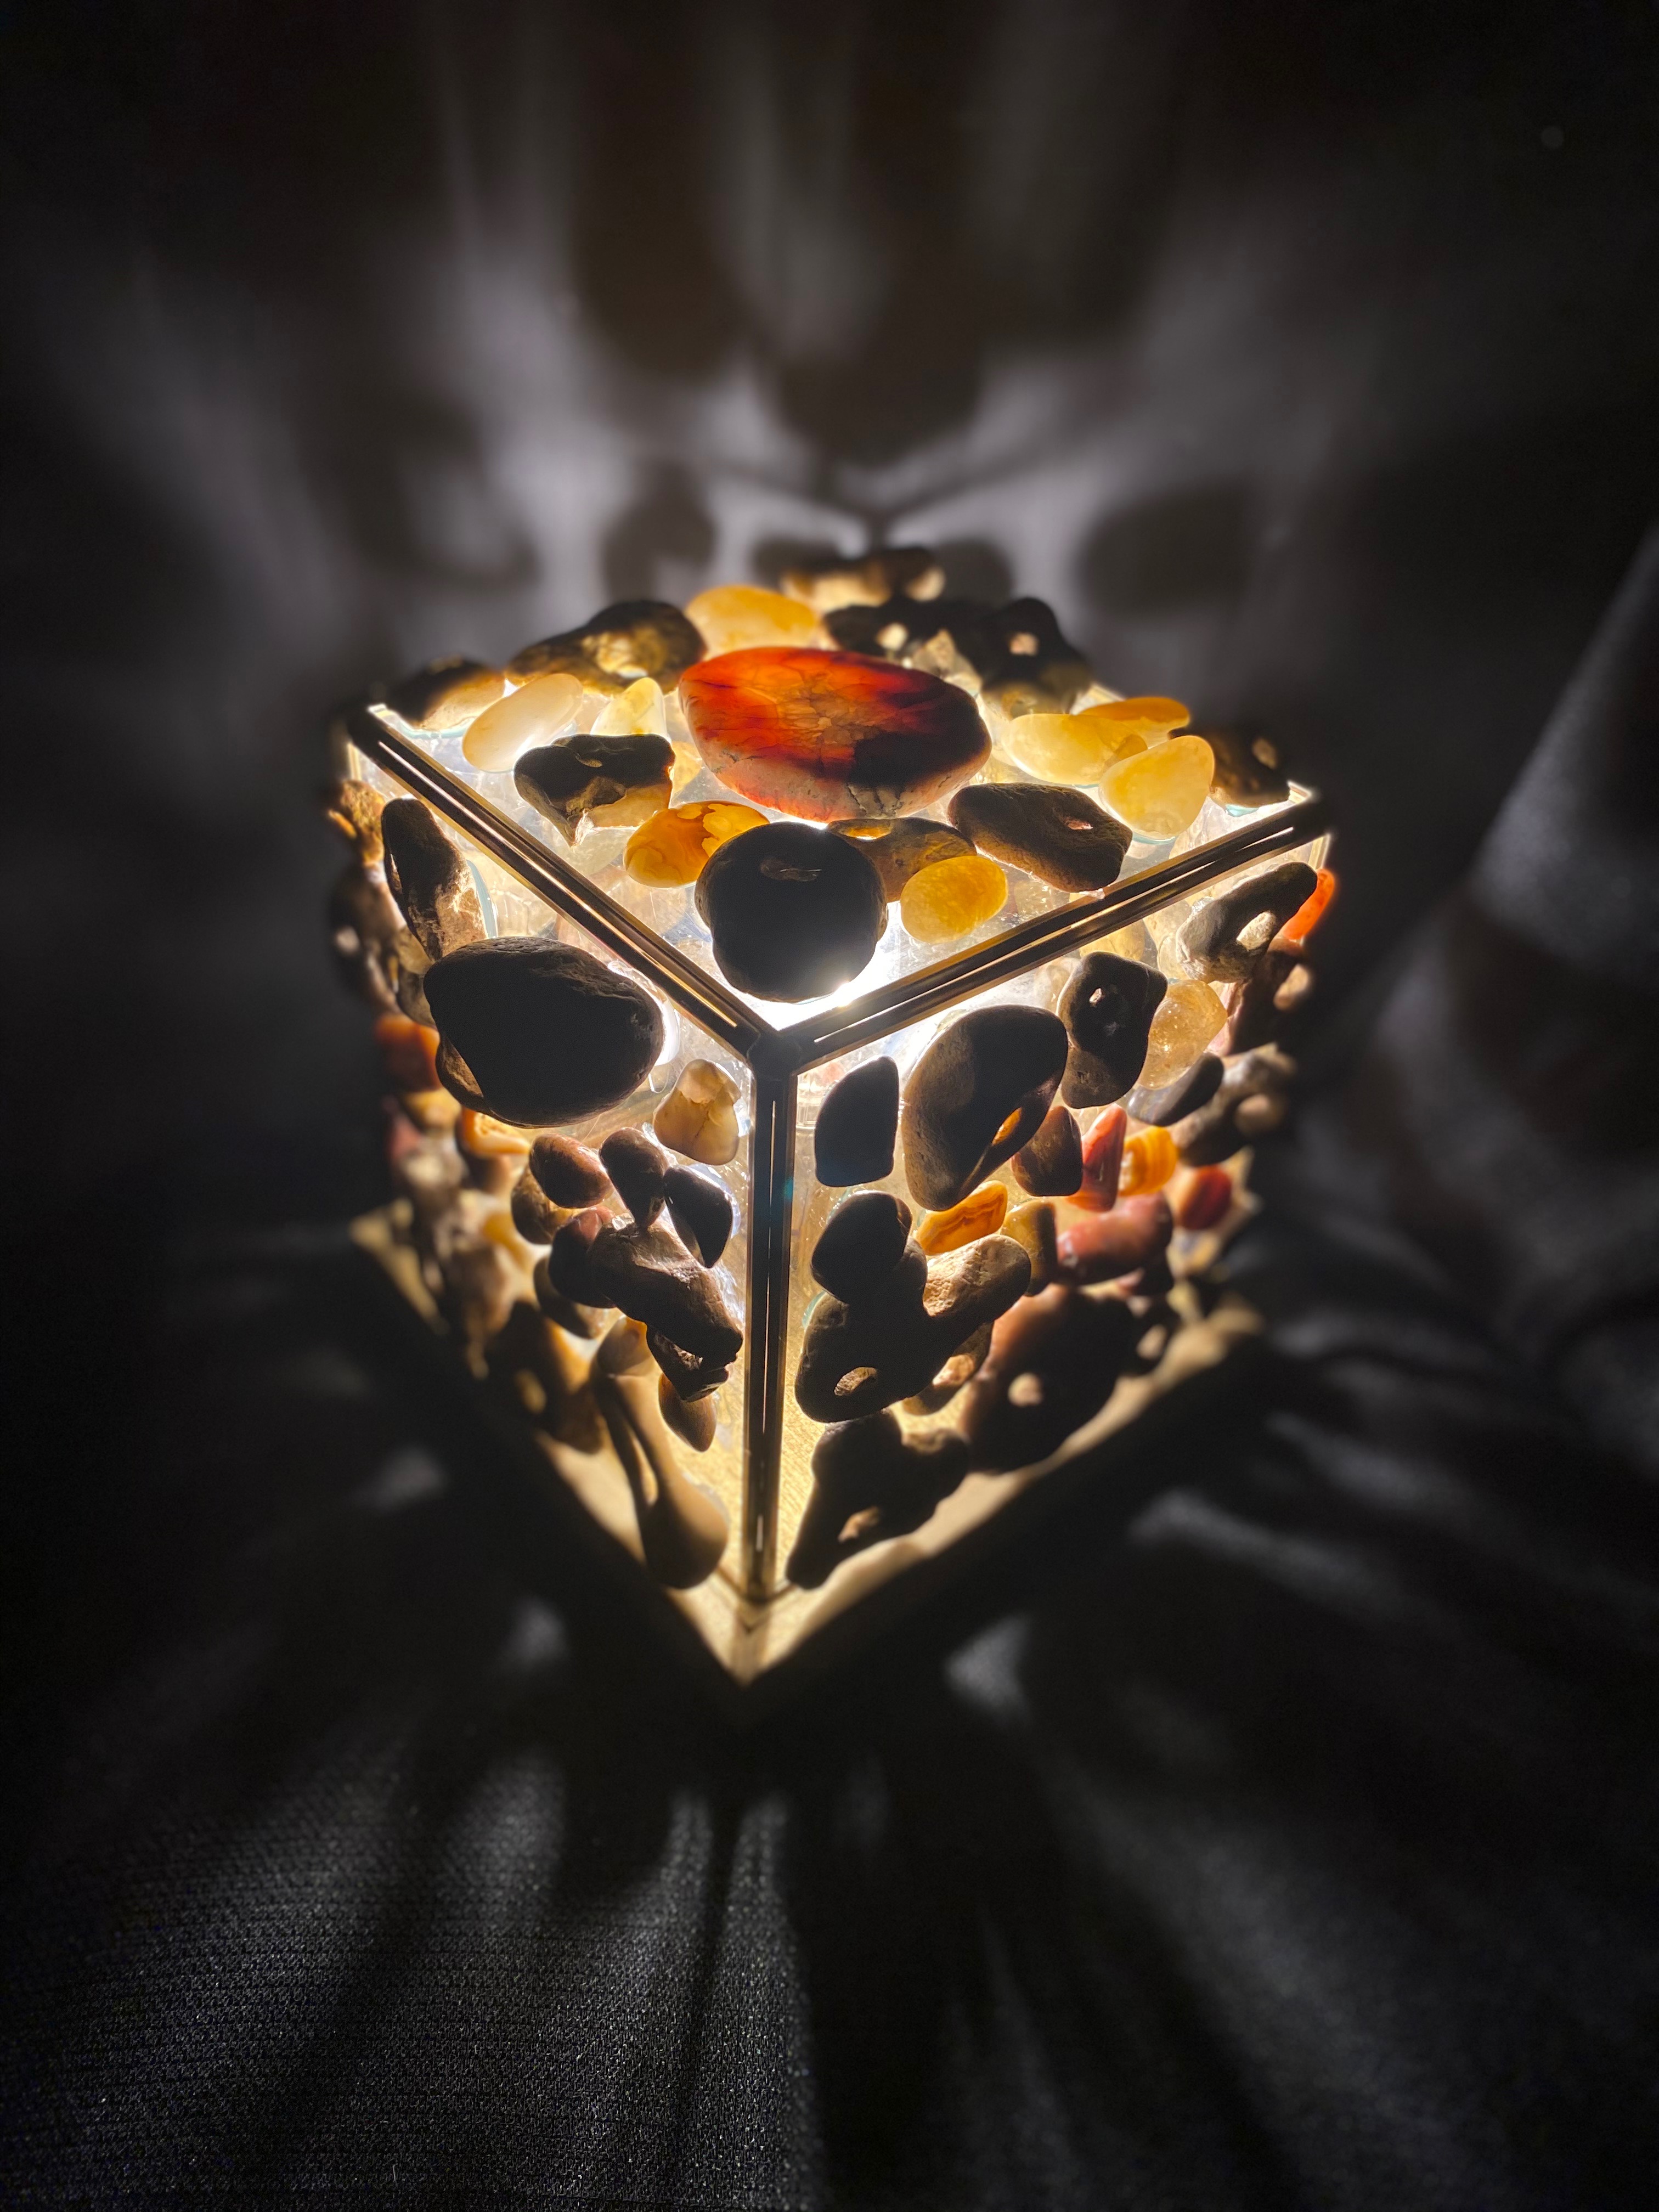 Image of a lamp created by covering a box with different colored stones that light shines through.